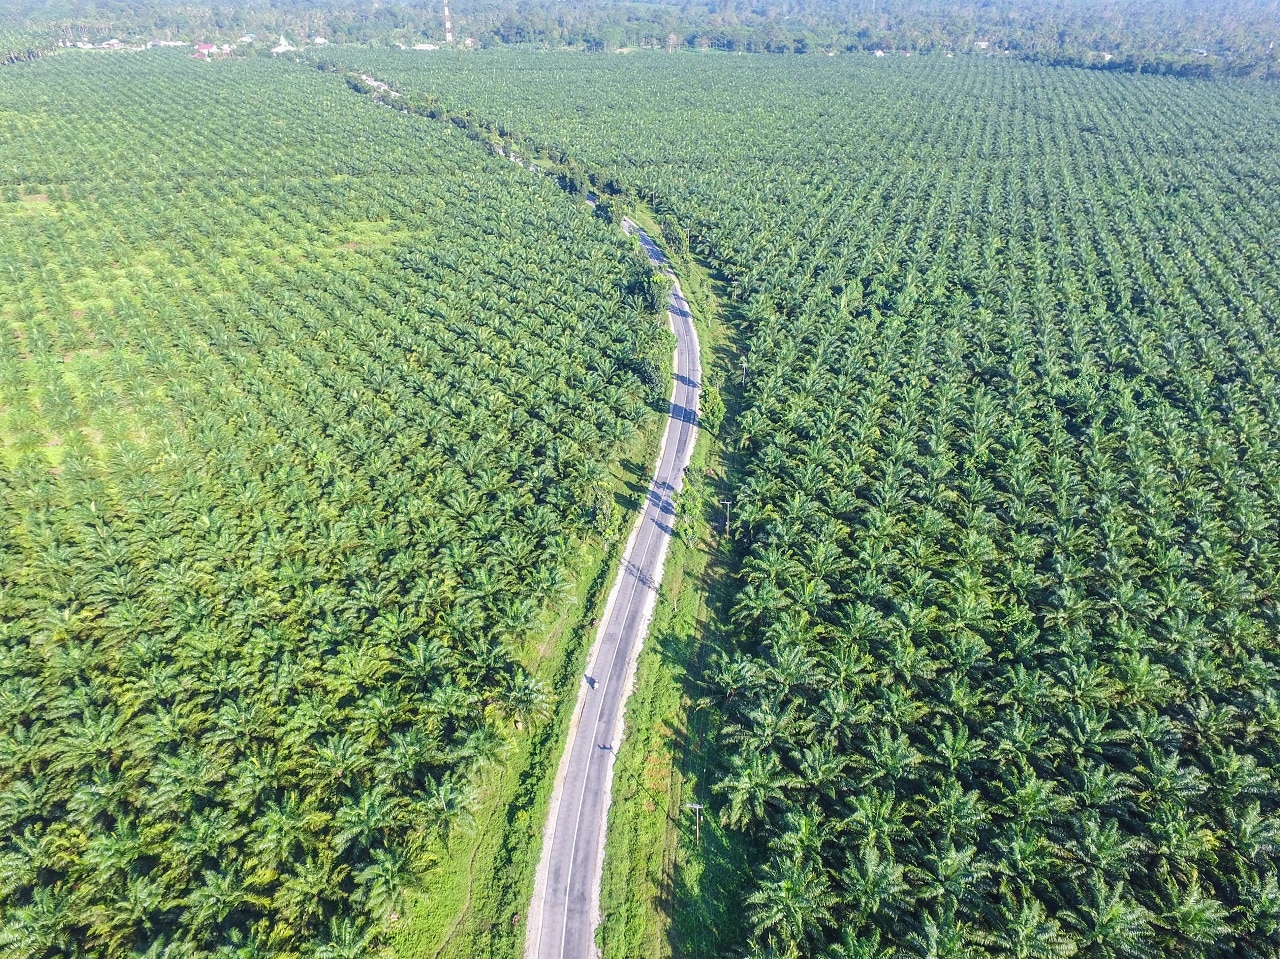  Human rights tragedy Palm oil plantations taking toll 